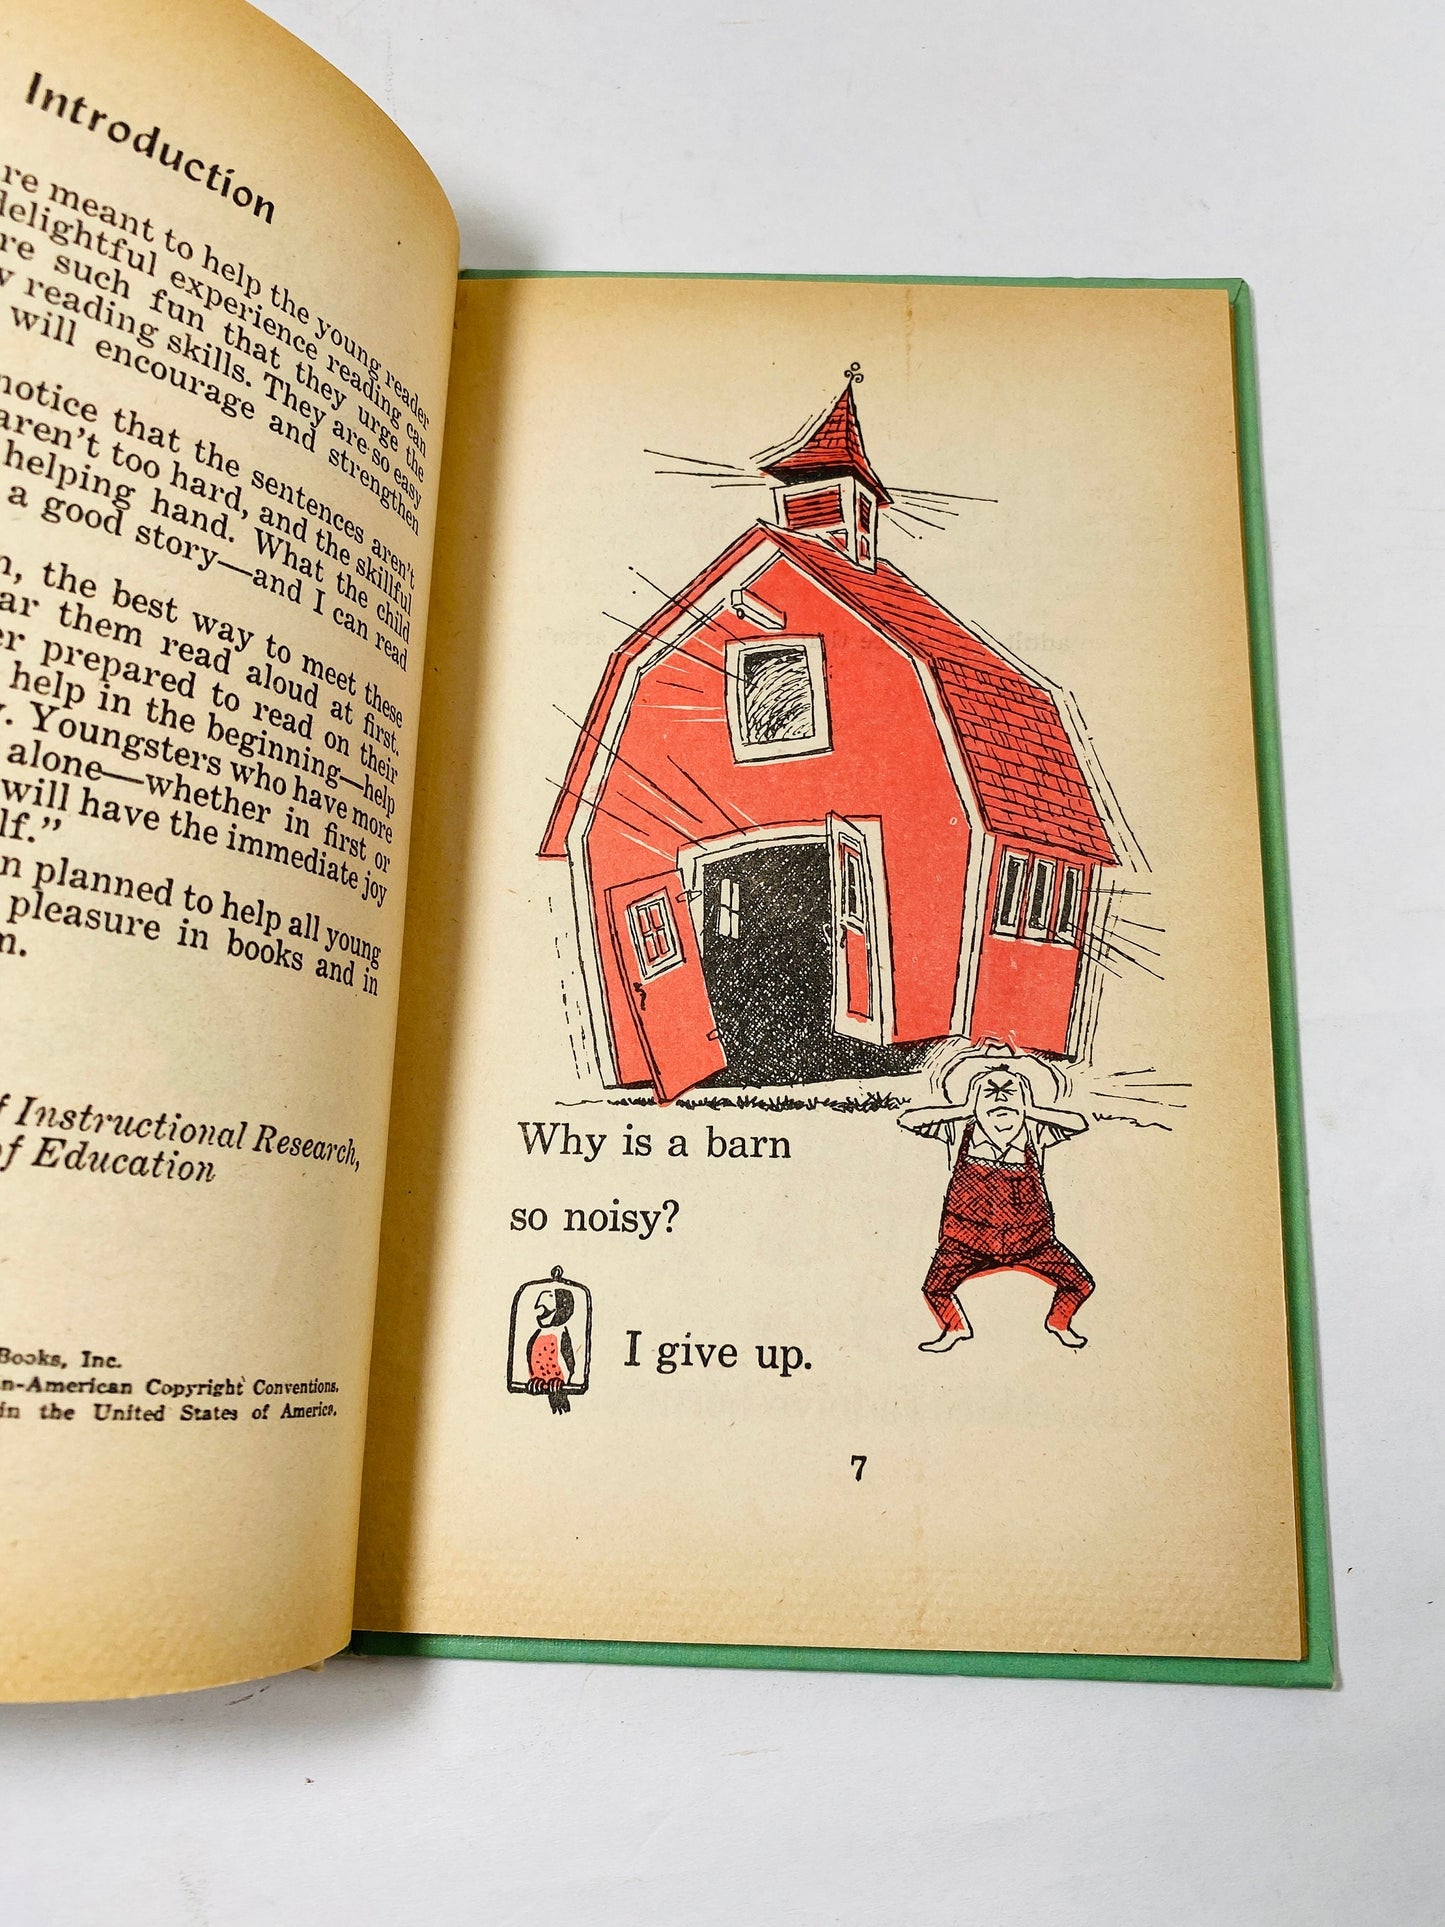 Jokes and Riddles vintage children's Easy Reader book by Jonathan Peter circa 1963